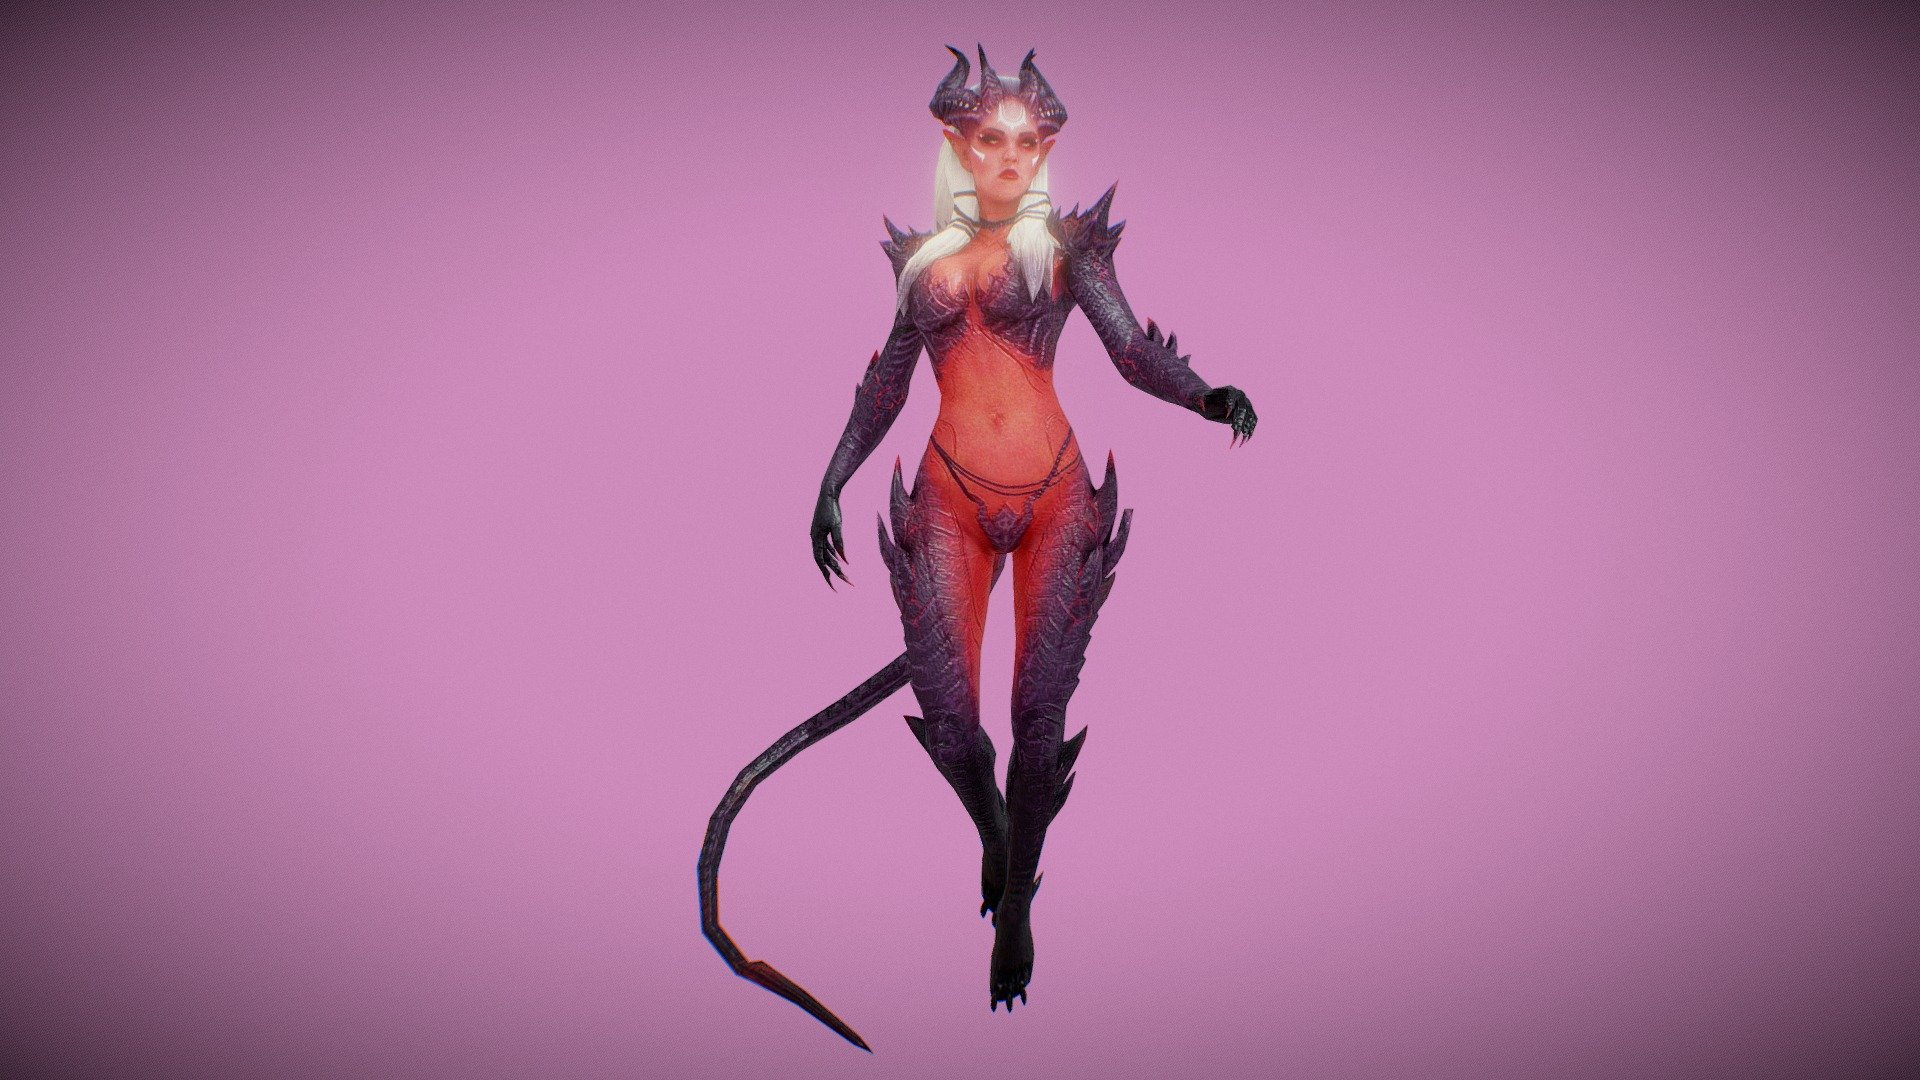 Lowpoly model of Hell Girl,game ready,rigged. PBR textures. Include weapons and nude mesh. Ready to import into various game engine like UE4 and Unity. Include nude meshes This character would work well as an NPC, a rank-and-file enemy, or a boss for a fantasy game. This character is of different proportions than the standard Epic Skeleton. The visualization of this character was done in Blender, Substance Painter. The rendering result in other versions with different settings may vary.

+animations unique animations: Idle,flyingLight attack, Critical attack,spear hit,Spear crit,Skill throw.

+Total poly count for each body version (include weapons)

+Rigging use FBX skin. Full body rig and basic facial rig.

+PBR textures (Metallic-Roughness) . DirectX Normal Maps. .PNG format.

Let me know if you have any questions, I’ll be glad to help! - Hell Girl - Buy Royalty Free 3D model by Luna Studio (@StudioLuna) 3d model